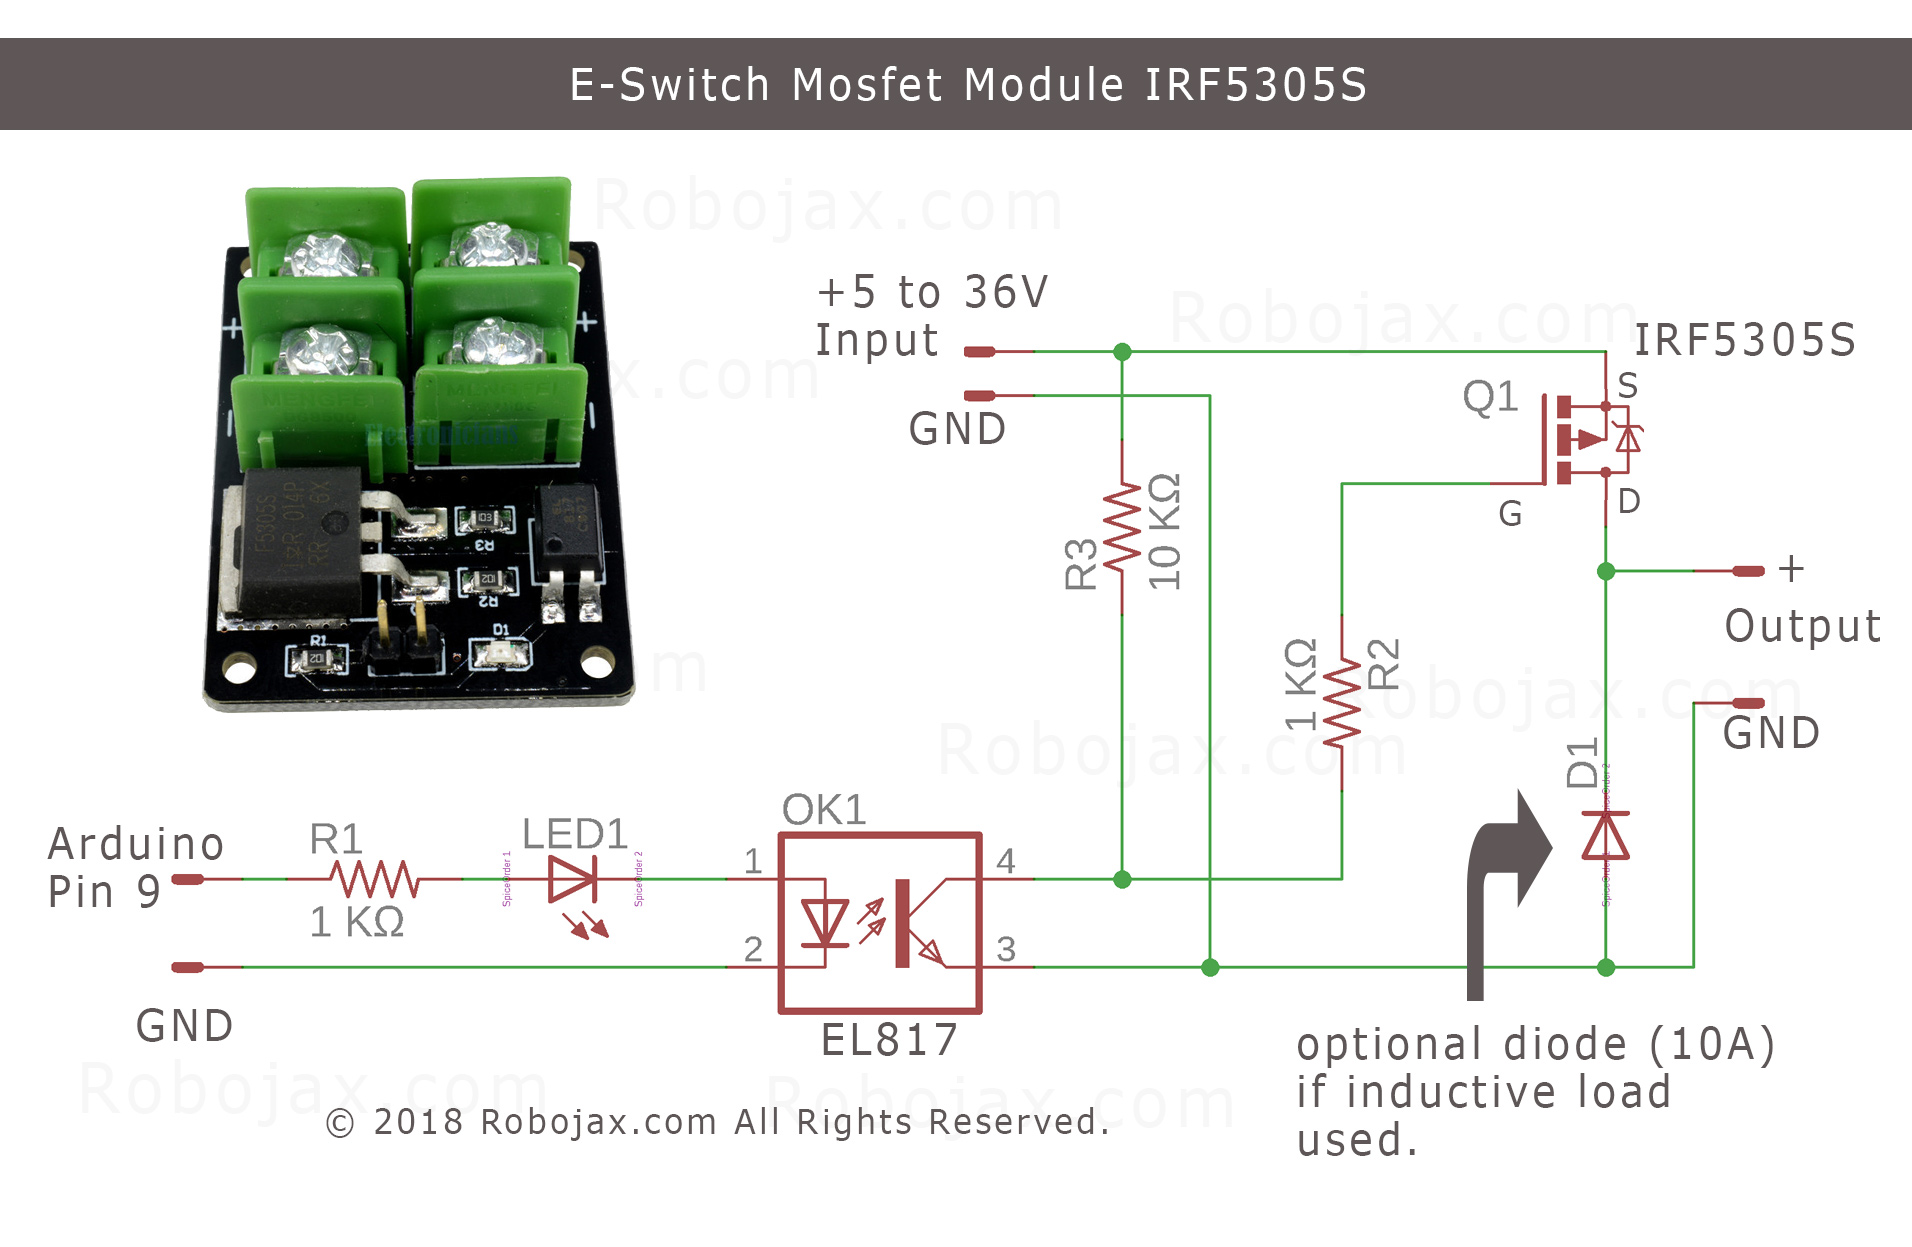 Schematic diagram of E-Switch based on IRF5305 Mosfet